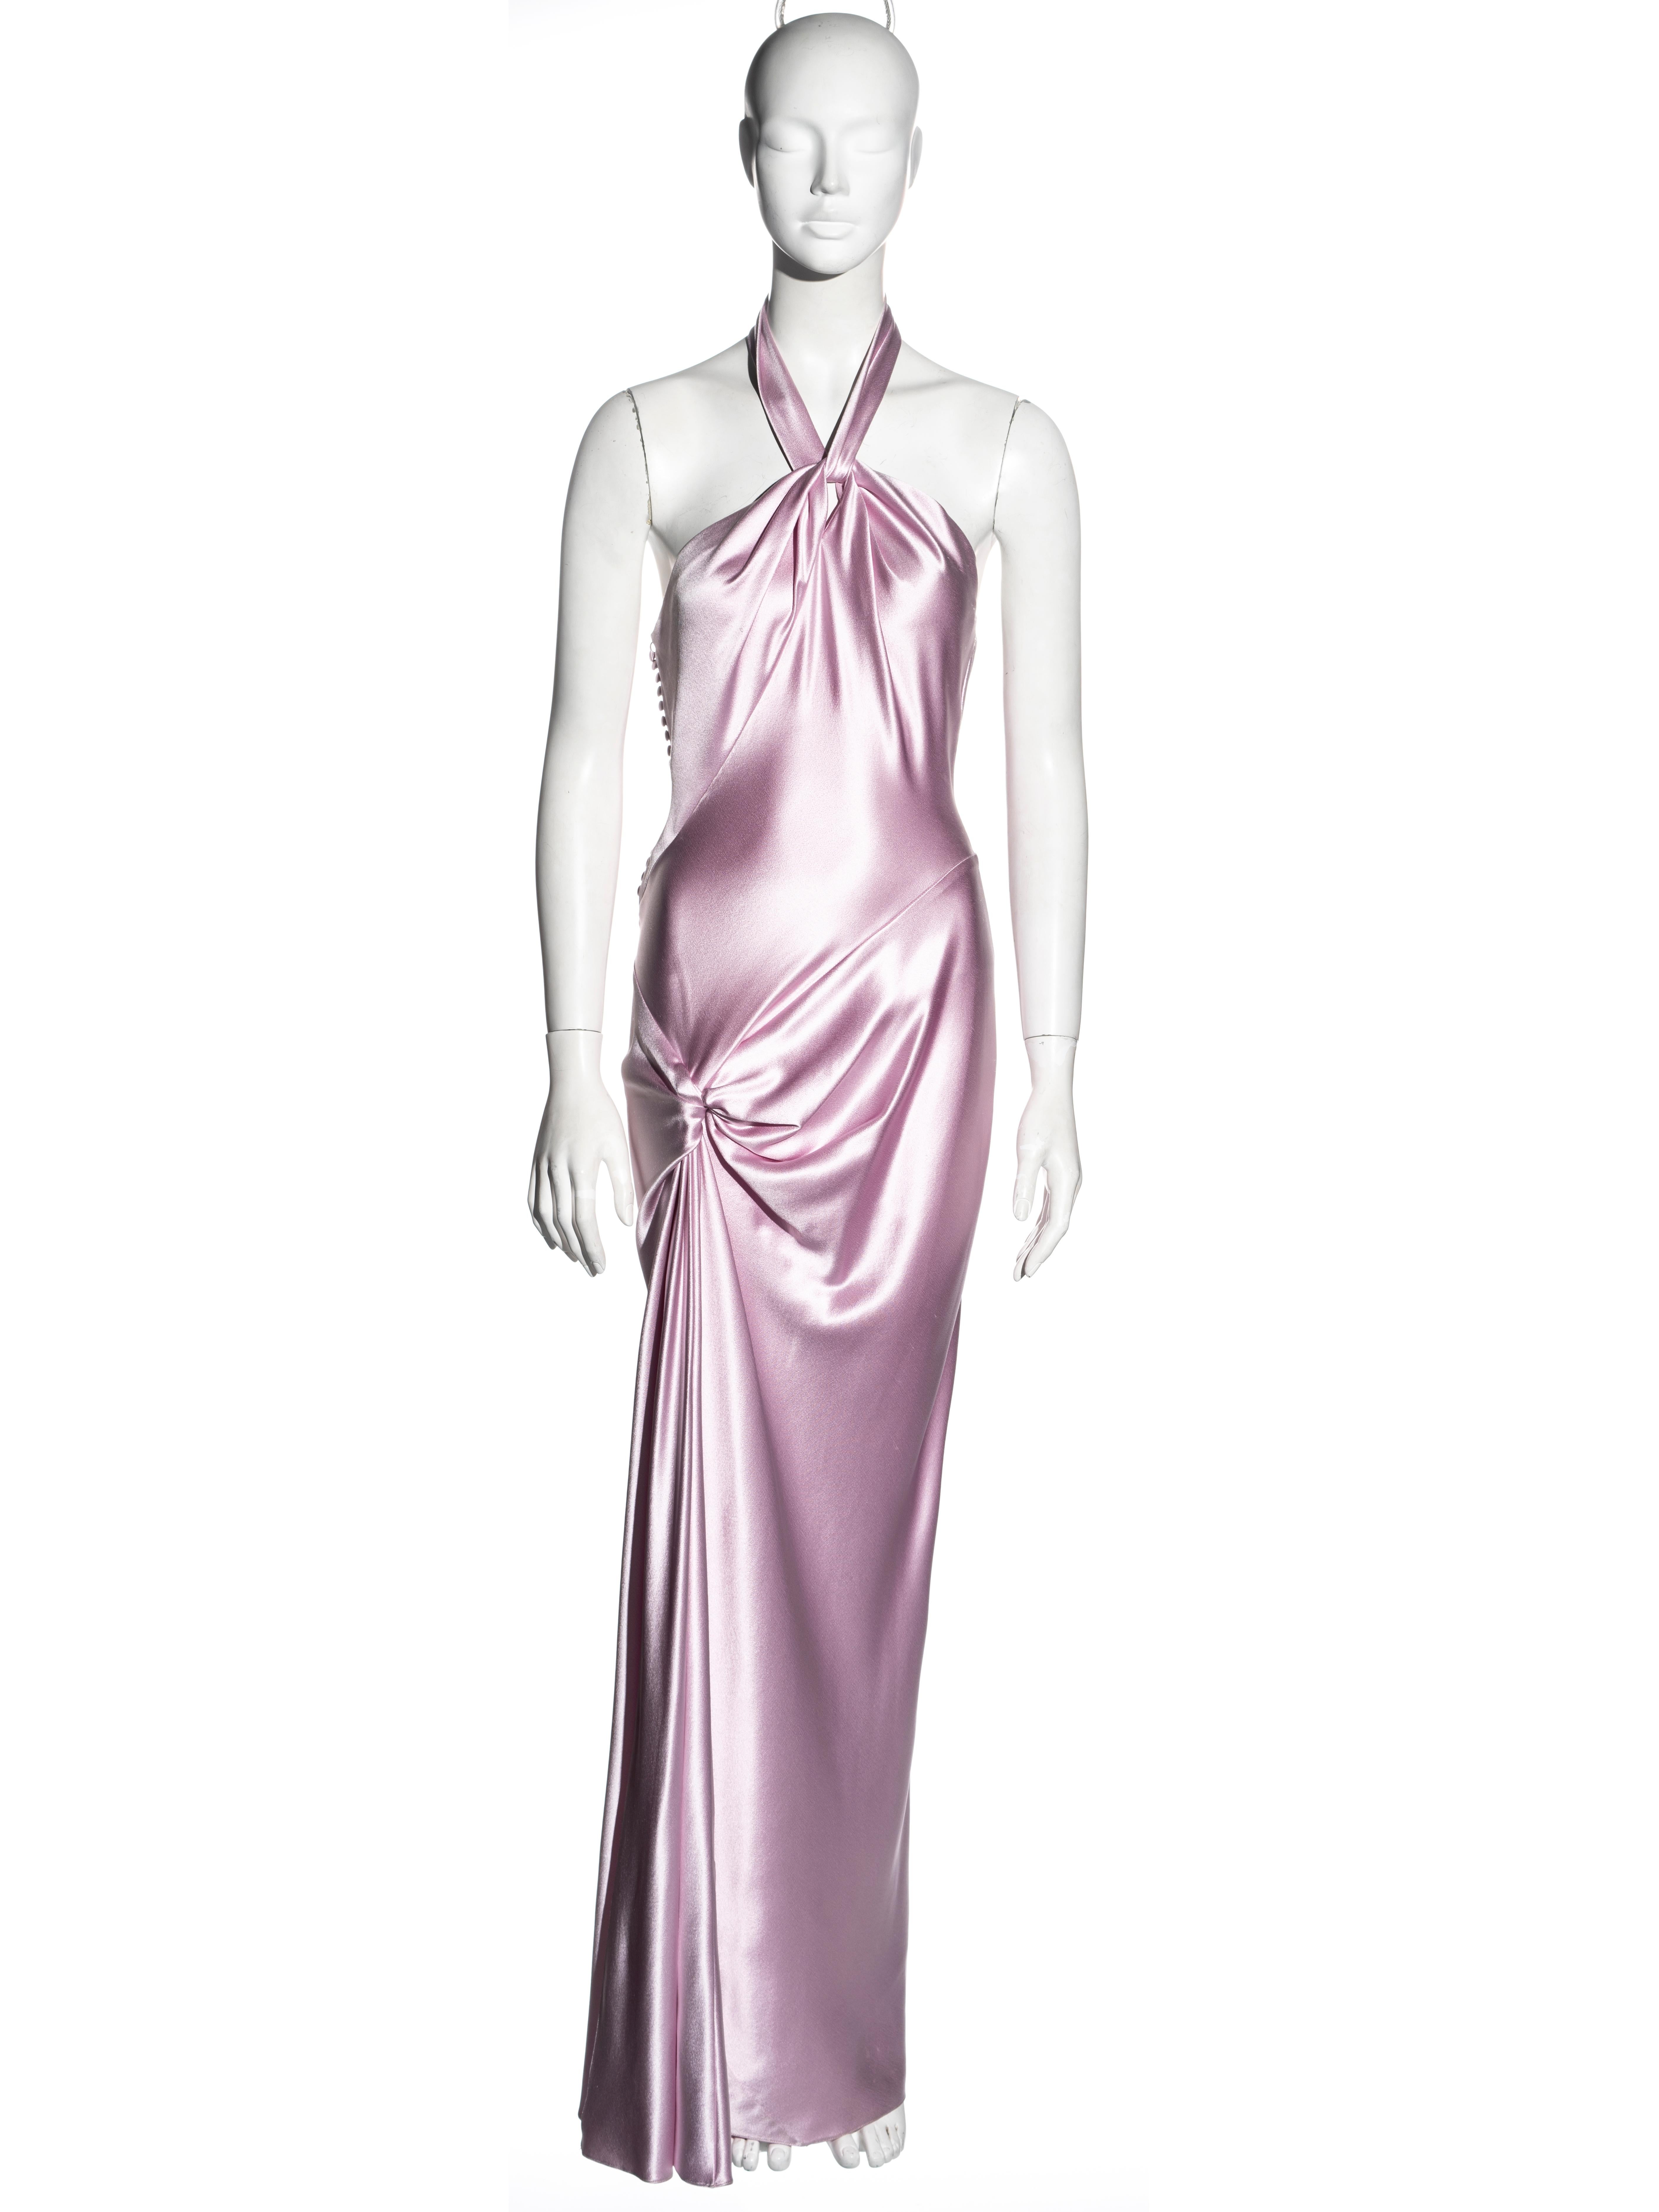 ▪ Christian Dior evening dress
▪ Designed by John Galliano
▪ Charmeuse pure silk in cherry blossom pink
▪ Bias-cut
▪ Halter-neck
▪ Knot detail at the hip
▪ High leg slit 
▪ Multiple fabric buttons
▪ FR 40 - UK 12 - US 8
▪ Fall-Winter 2003
▪ 100%